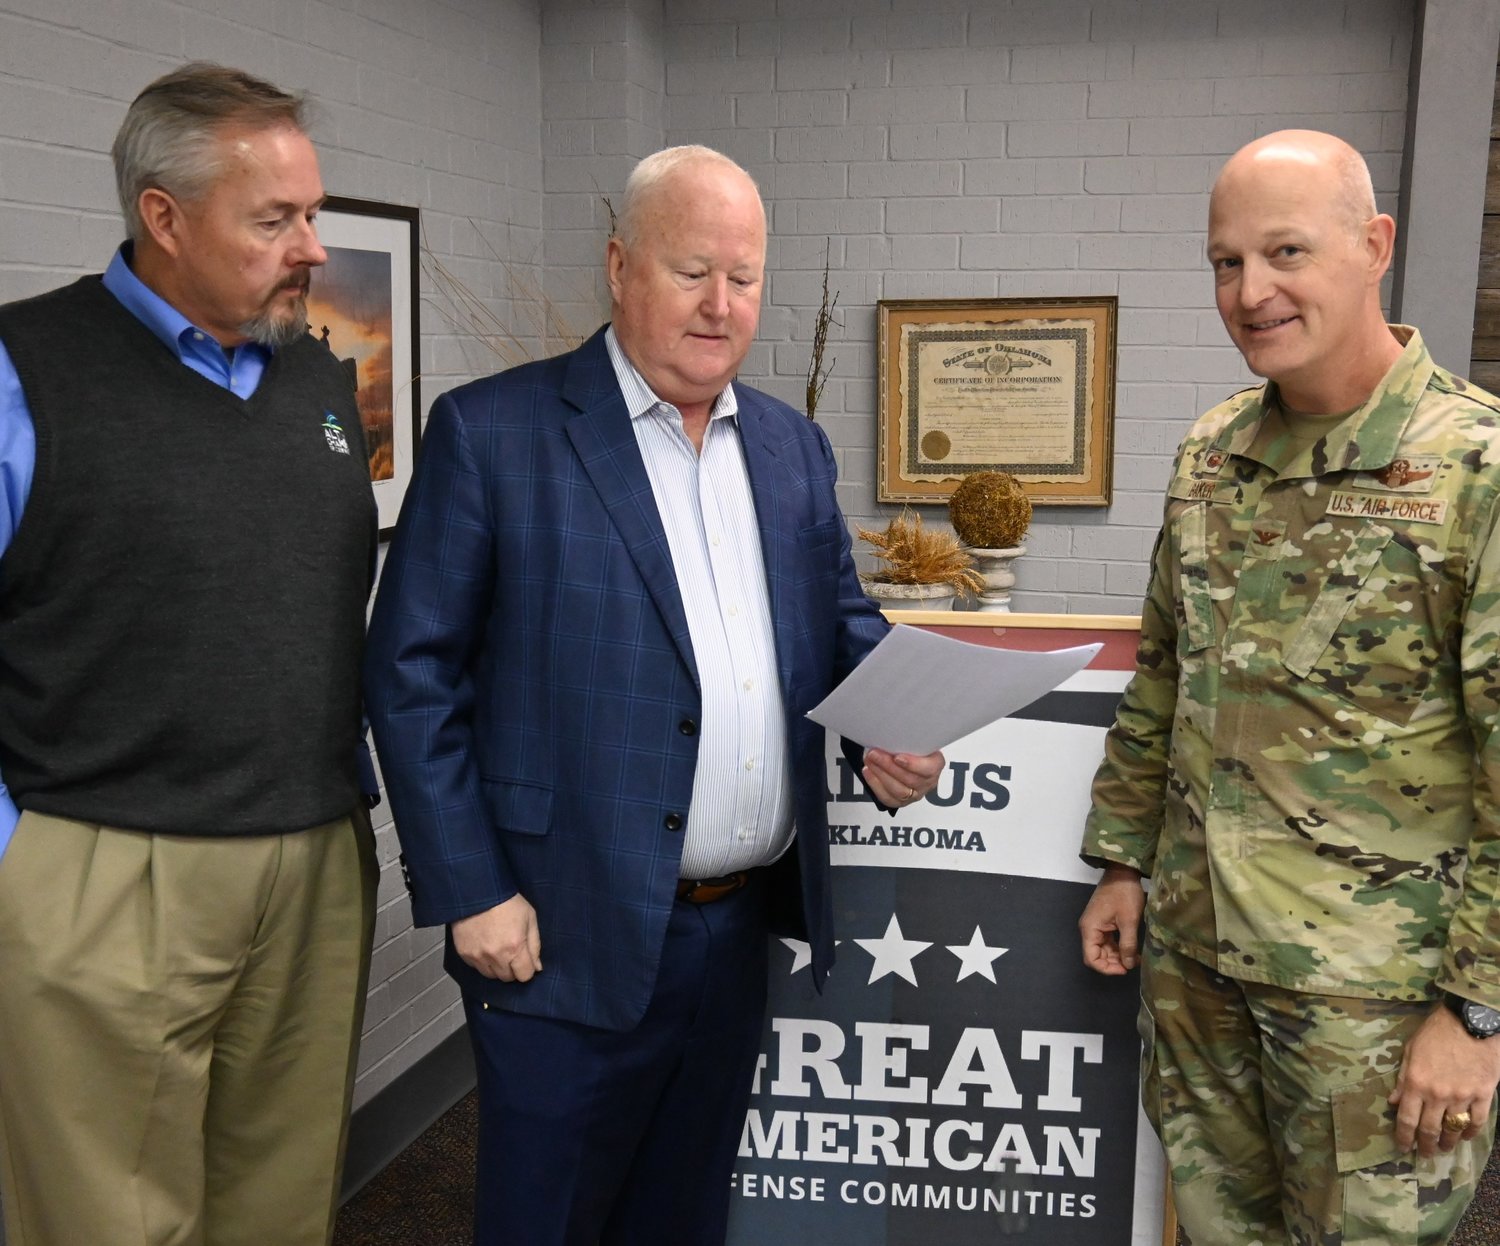 Civilian and military leaders excited about the news that Altus is on the short-list for an award of excellence: left, Rodger Kerr, President and CEO of the Altus Chamber of Commerce; Dr. Joe Leverett, chairman of the Military Affairs Committee; and Col Blaine L. Baker, Commander of Altus Air Force Base.